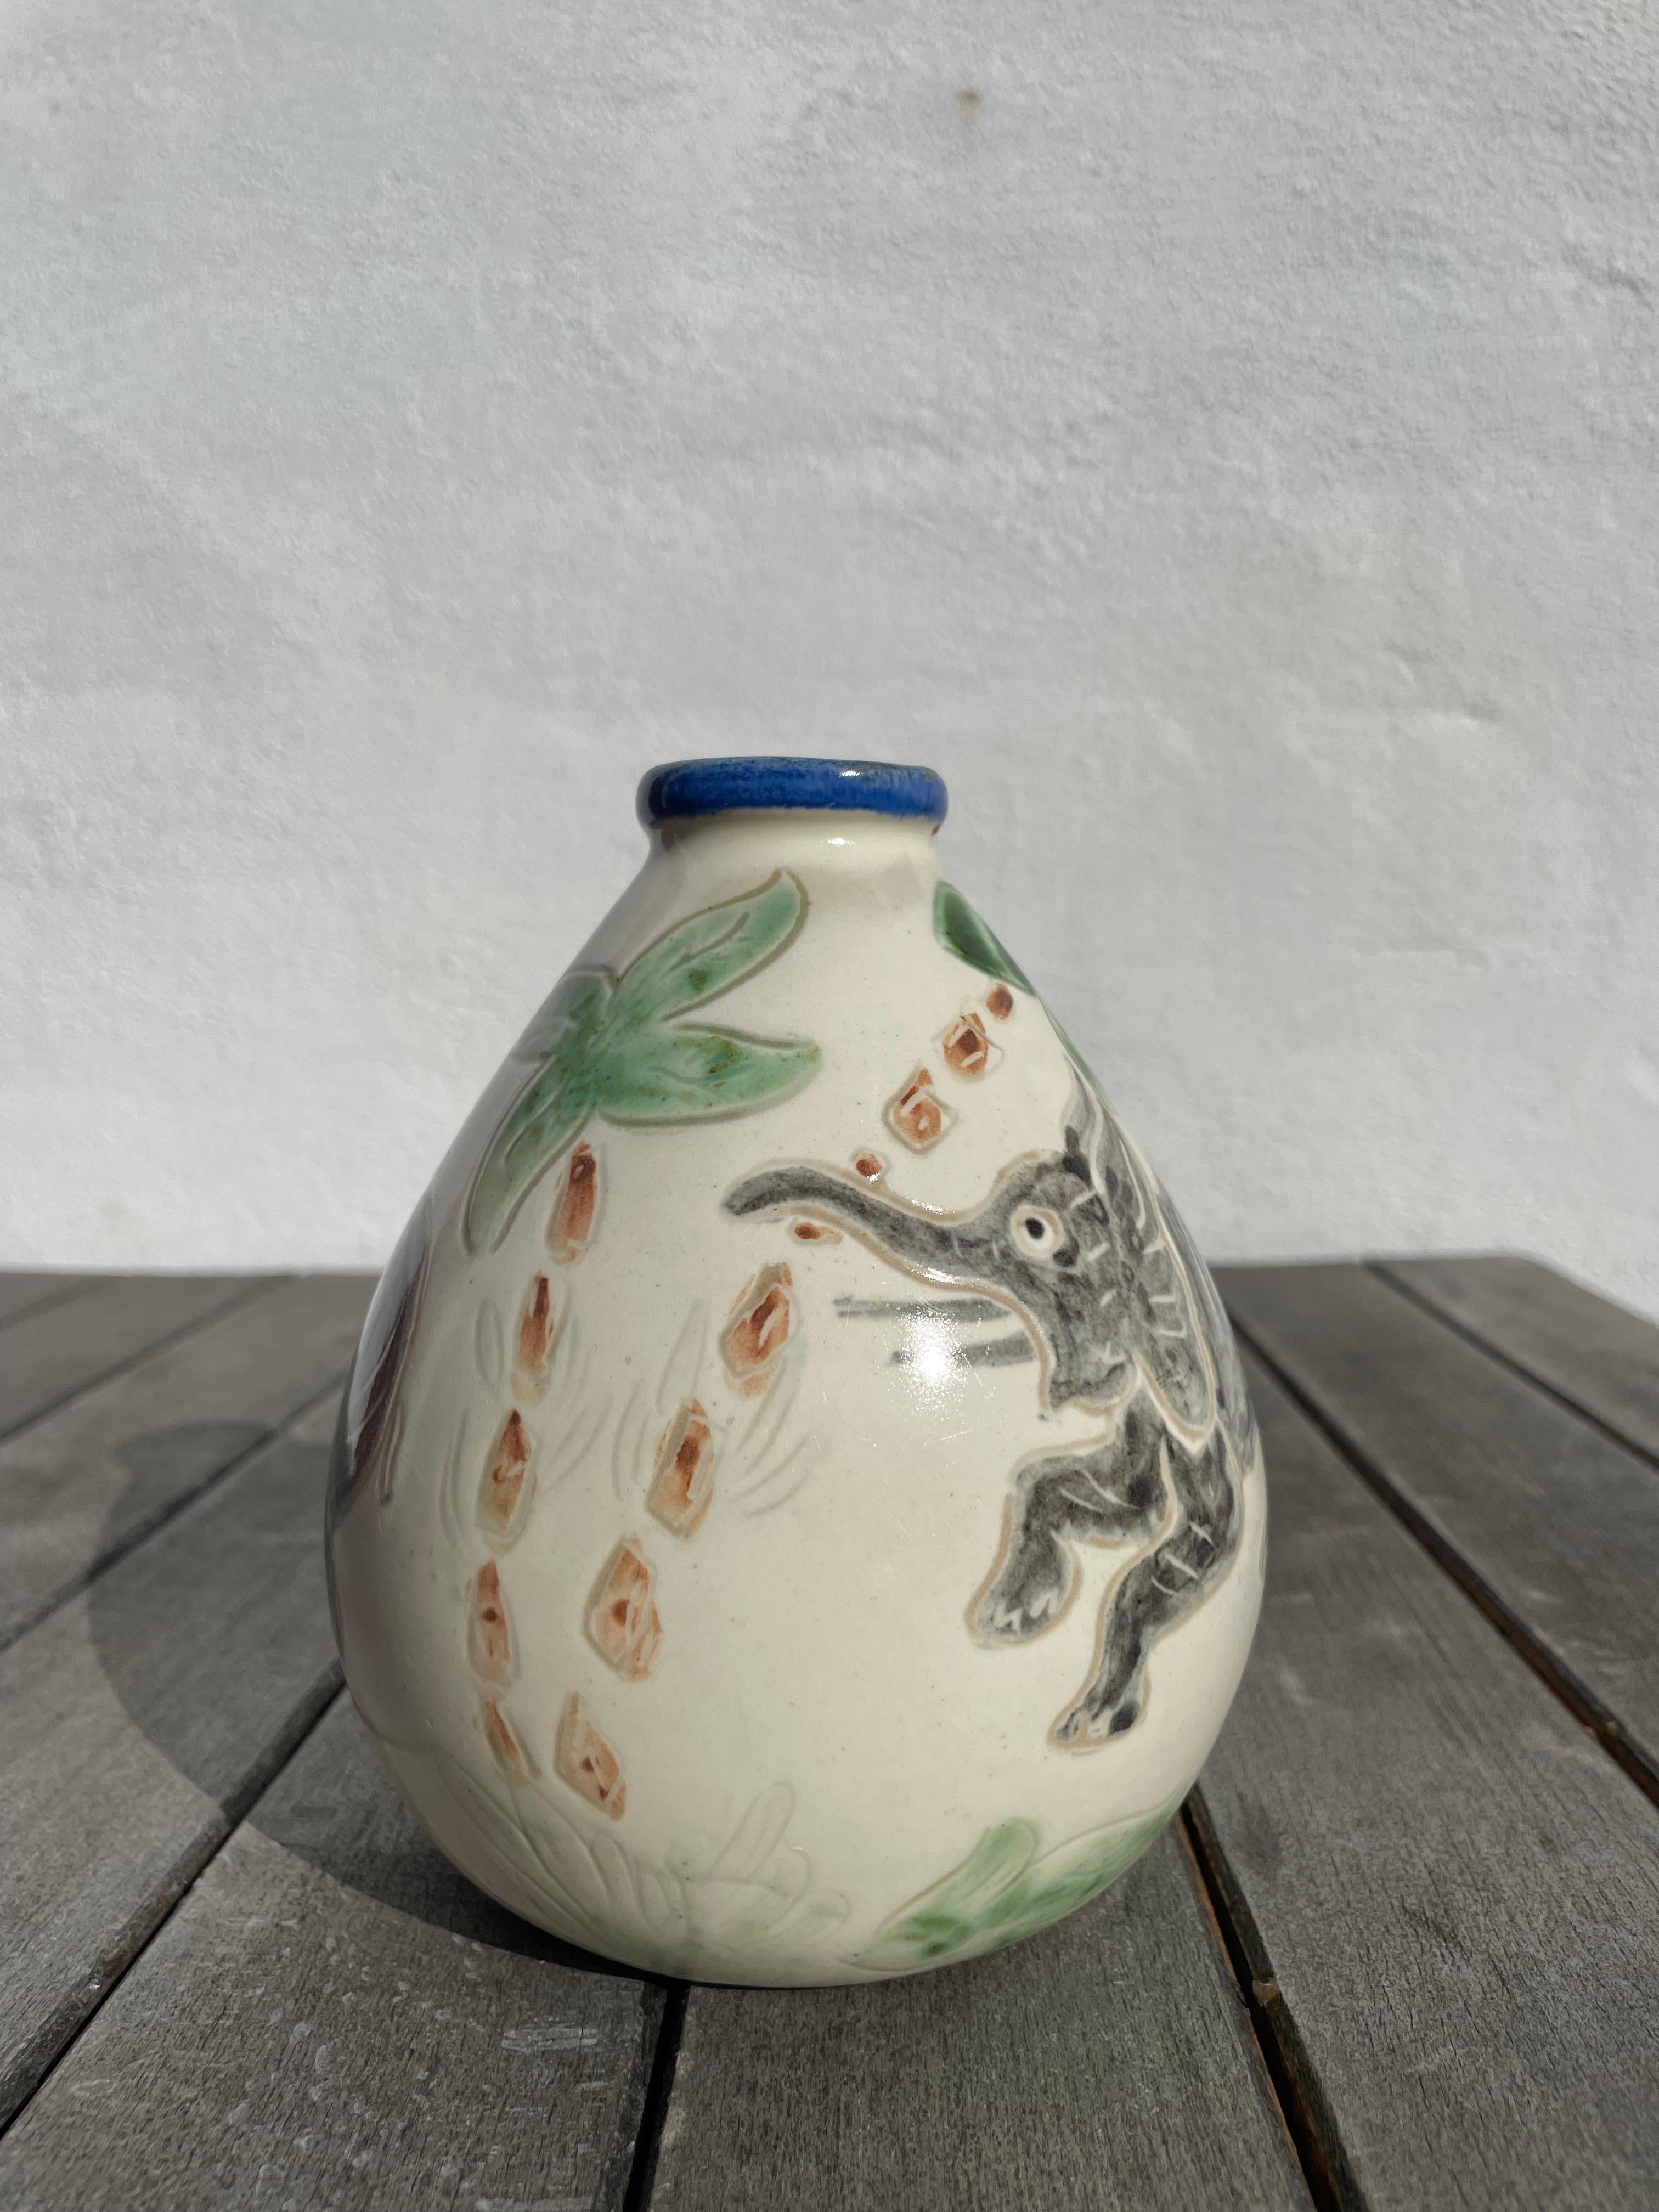 Mid-Century Modern Grimstrup Hand-Decorated Vase with Elephants, Palmtrees, Leaves, 1950s For Sale